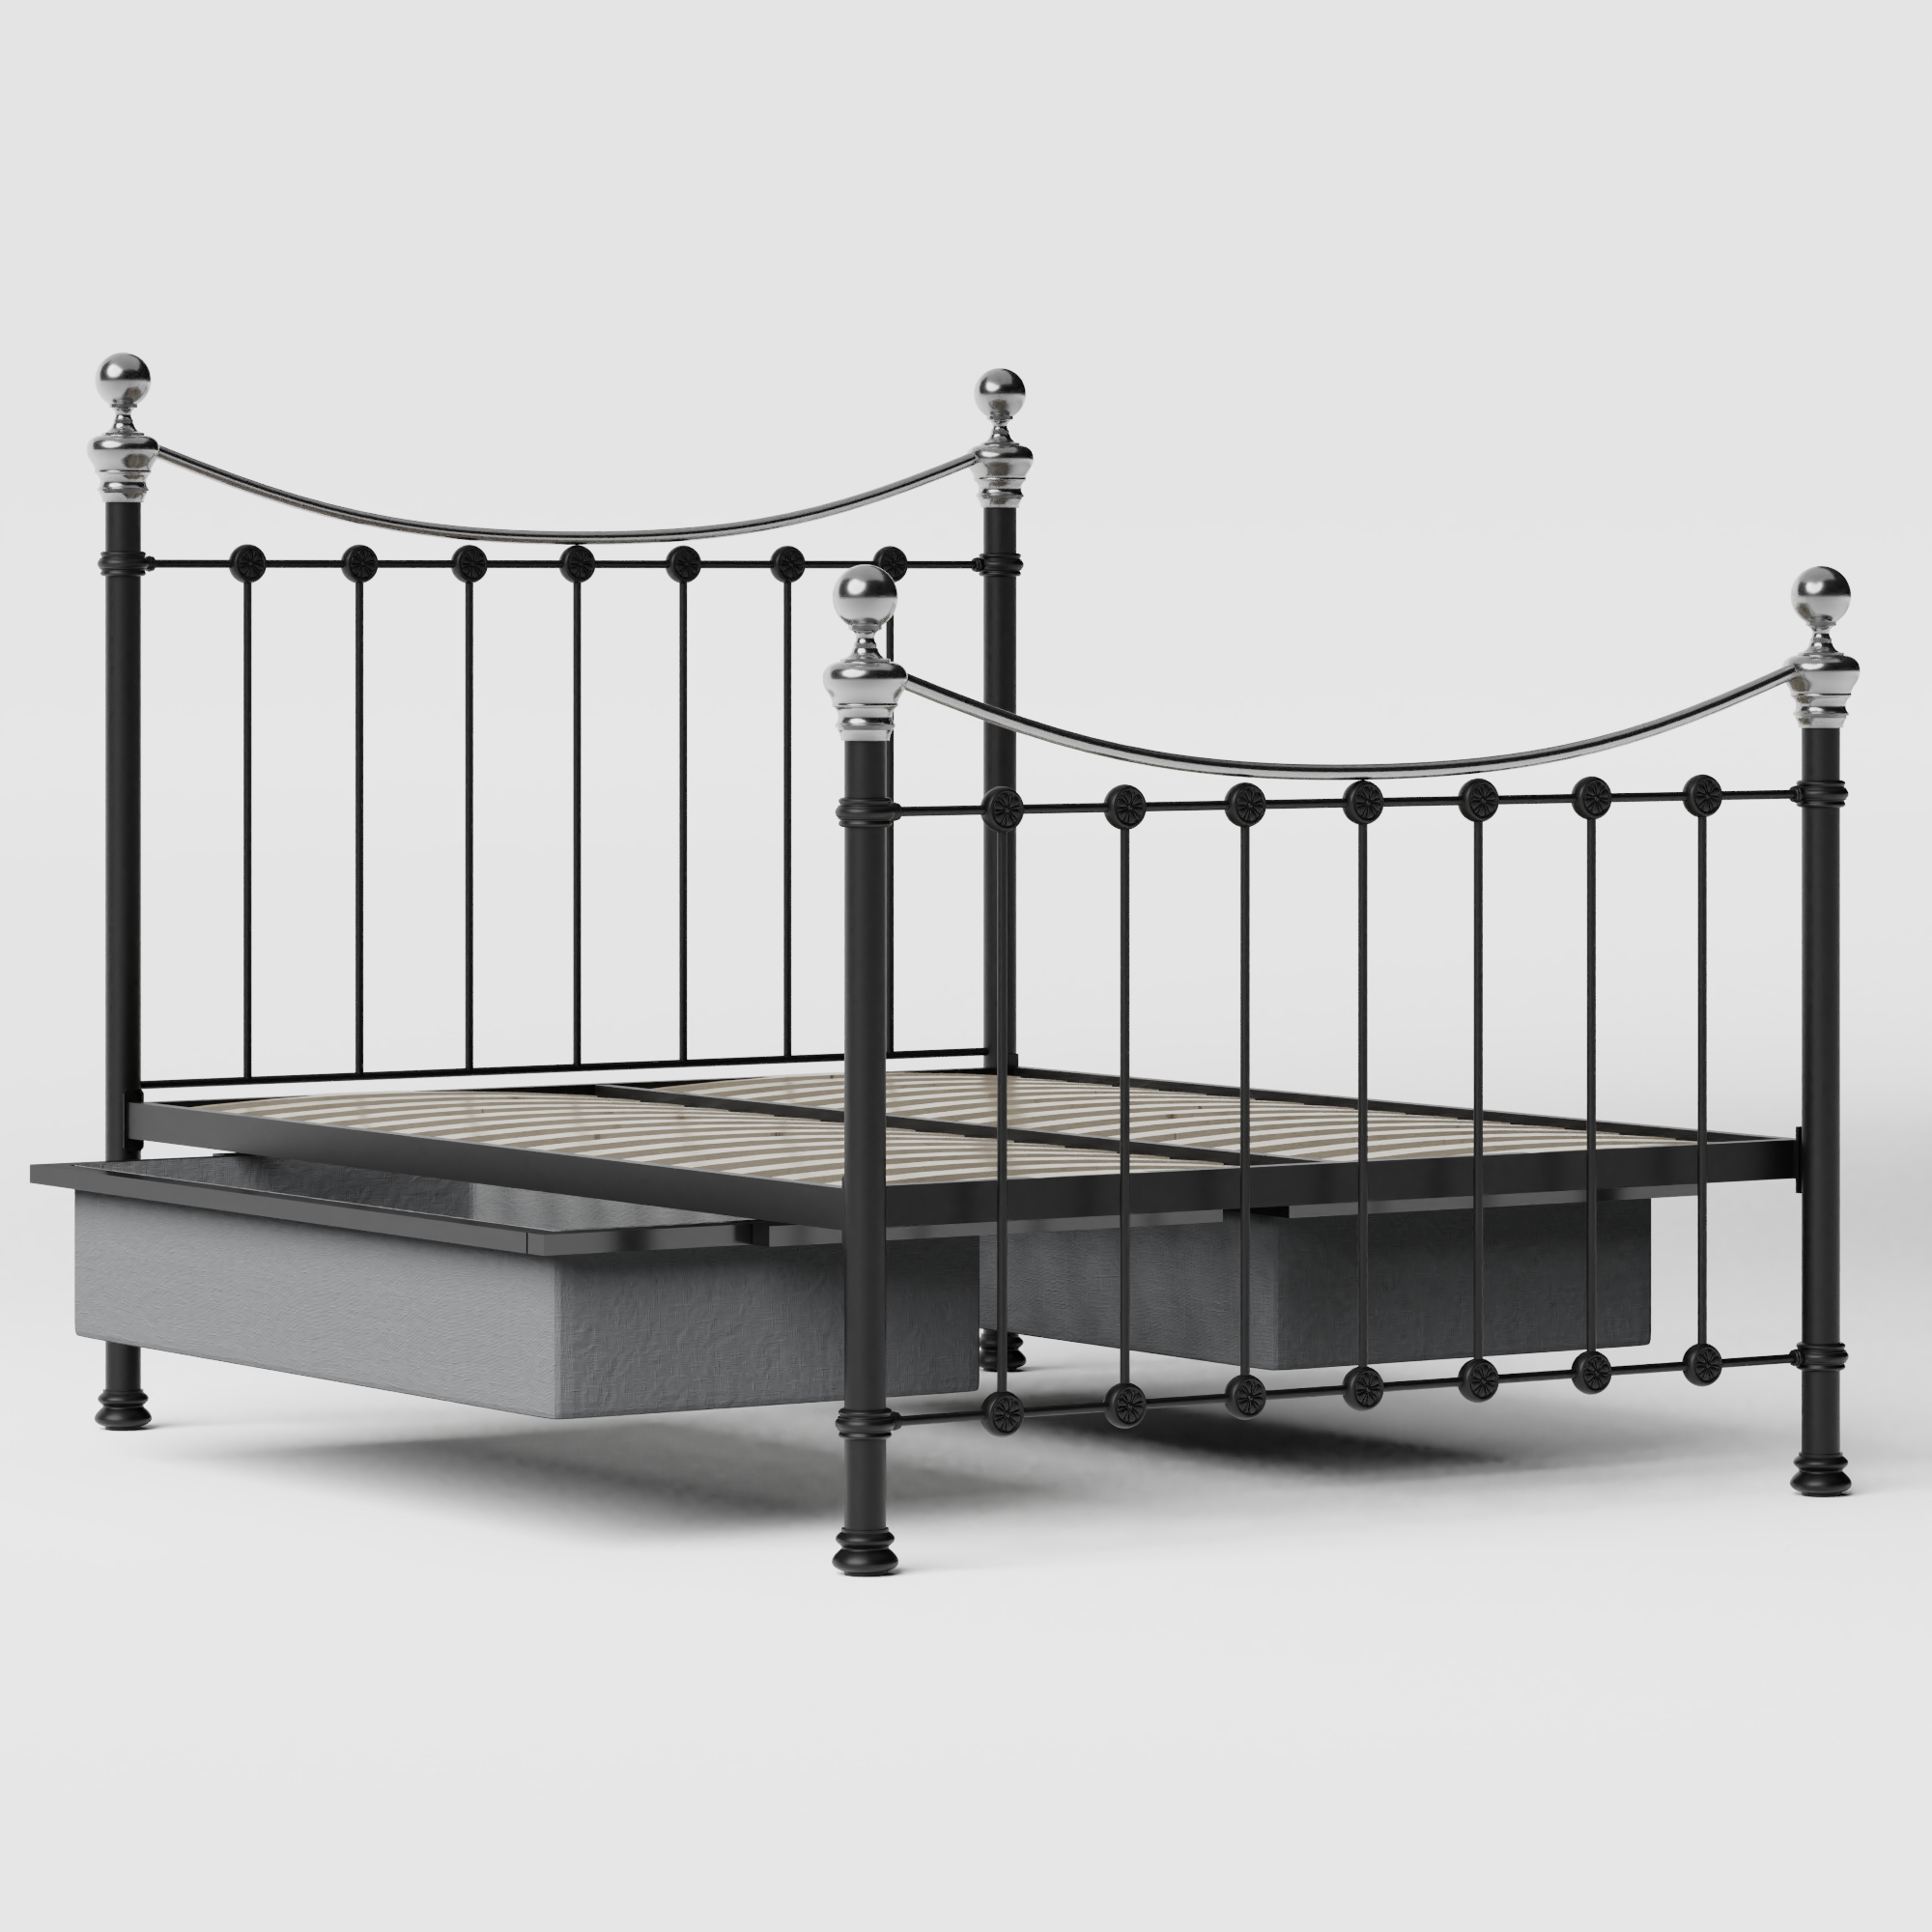 Selkirk Chromo iron/metal bed in black with drawers